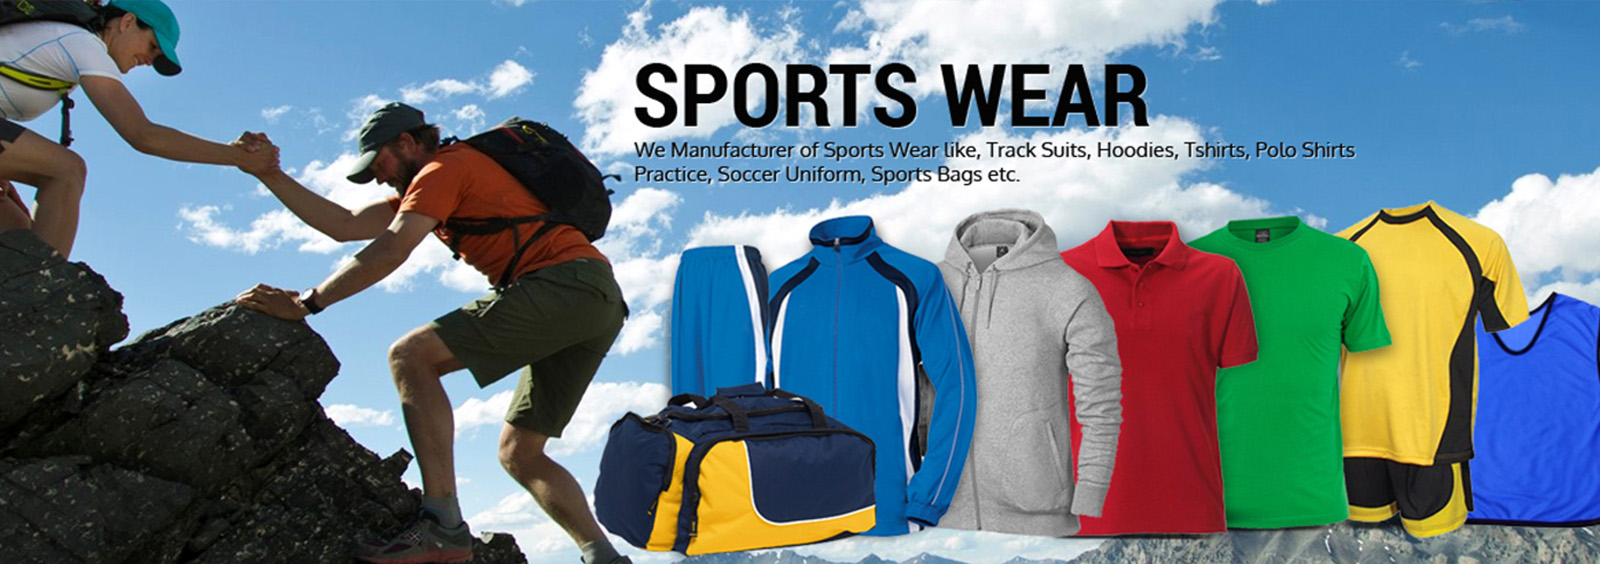 1 Sportswear Manufacturers Sweden High-Quality Athletic Apparel